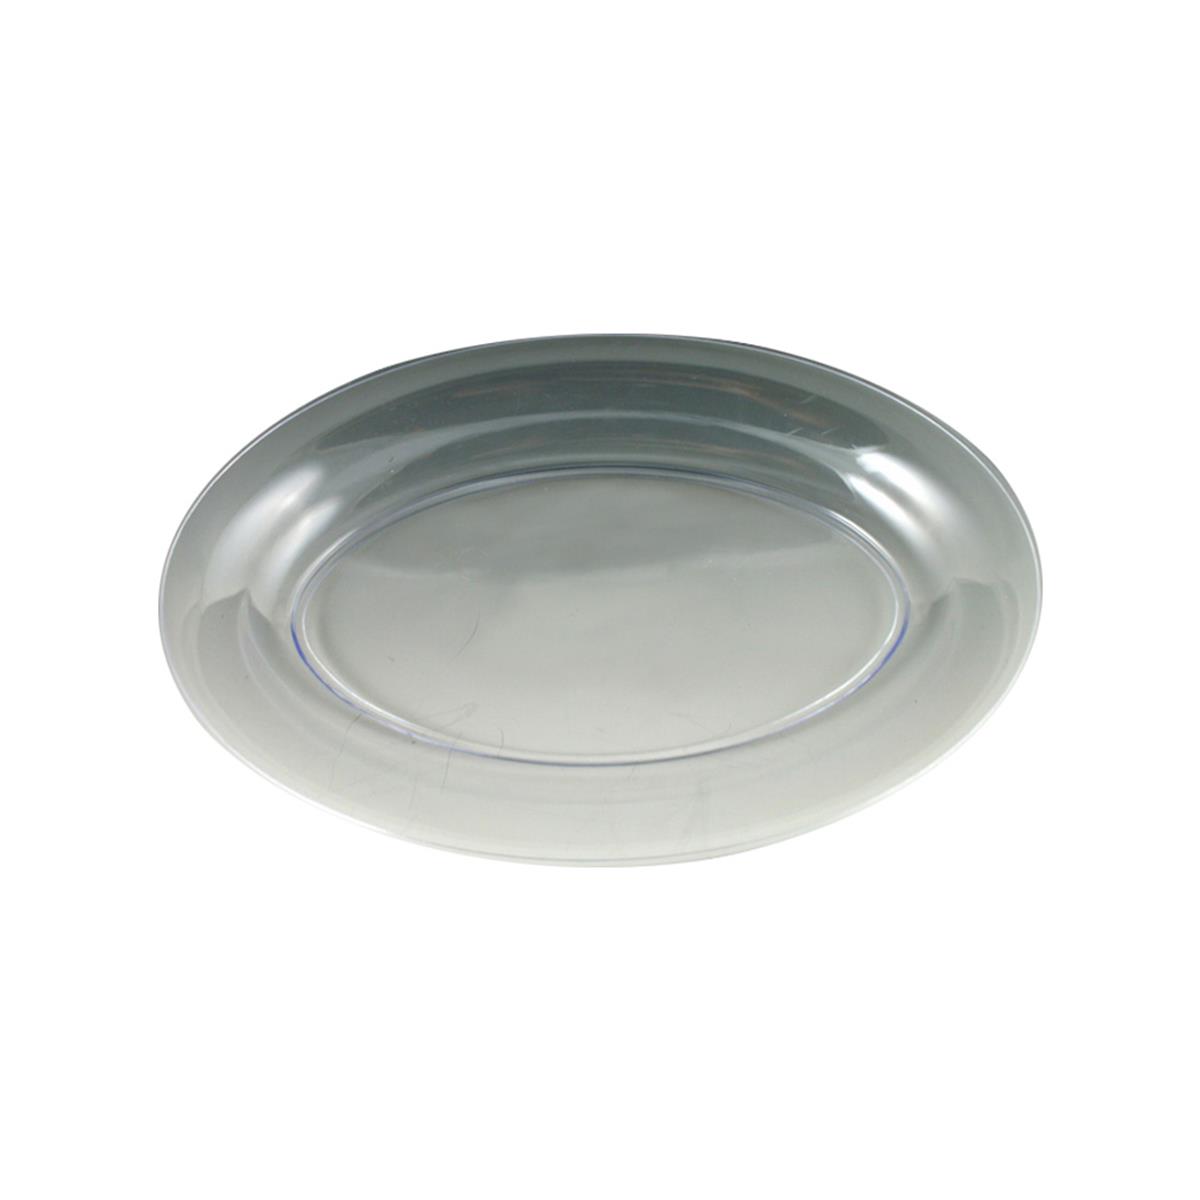 Mpi11166c Pe 11 X 16 In. Clear Sovereign Oval Tray - Case Of 25